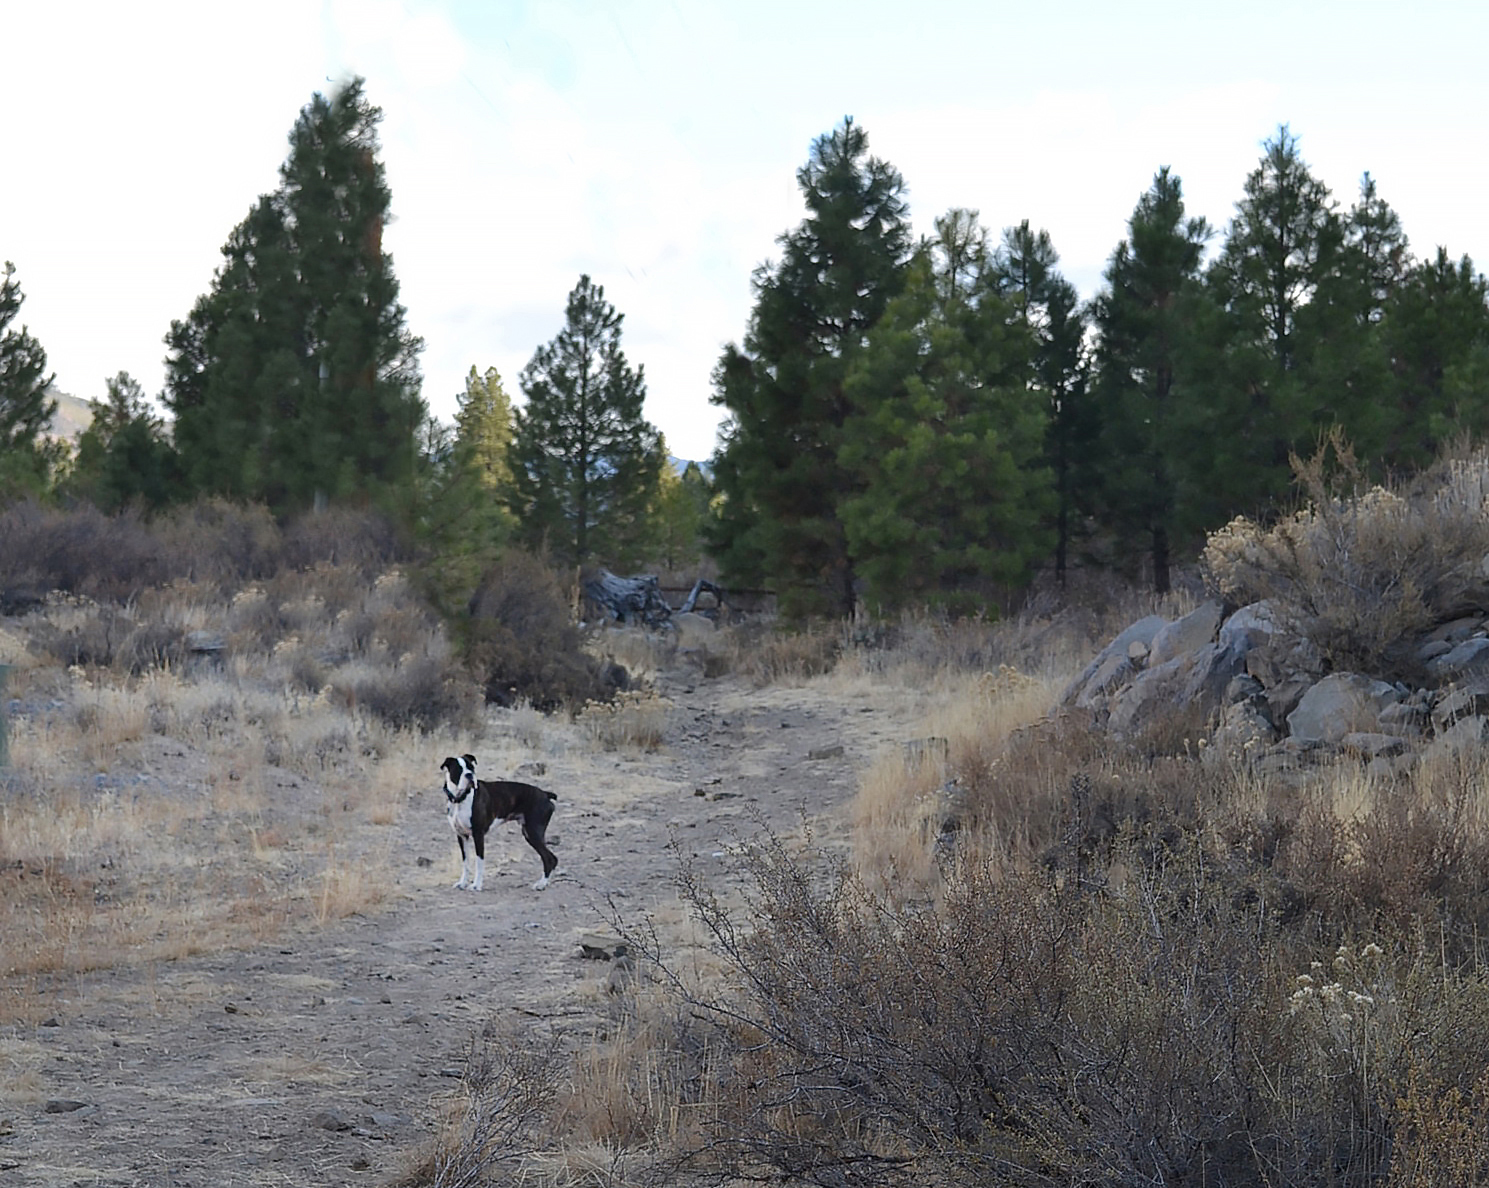 A boxer dog about to set out on a wilderness trail.